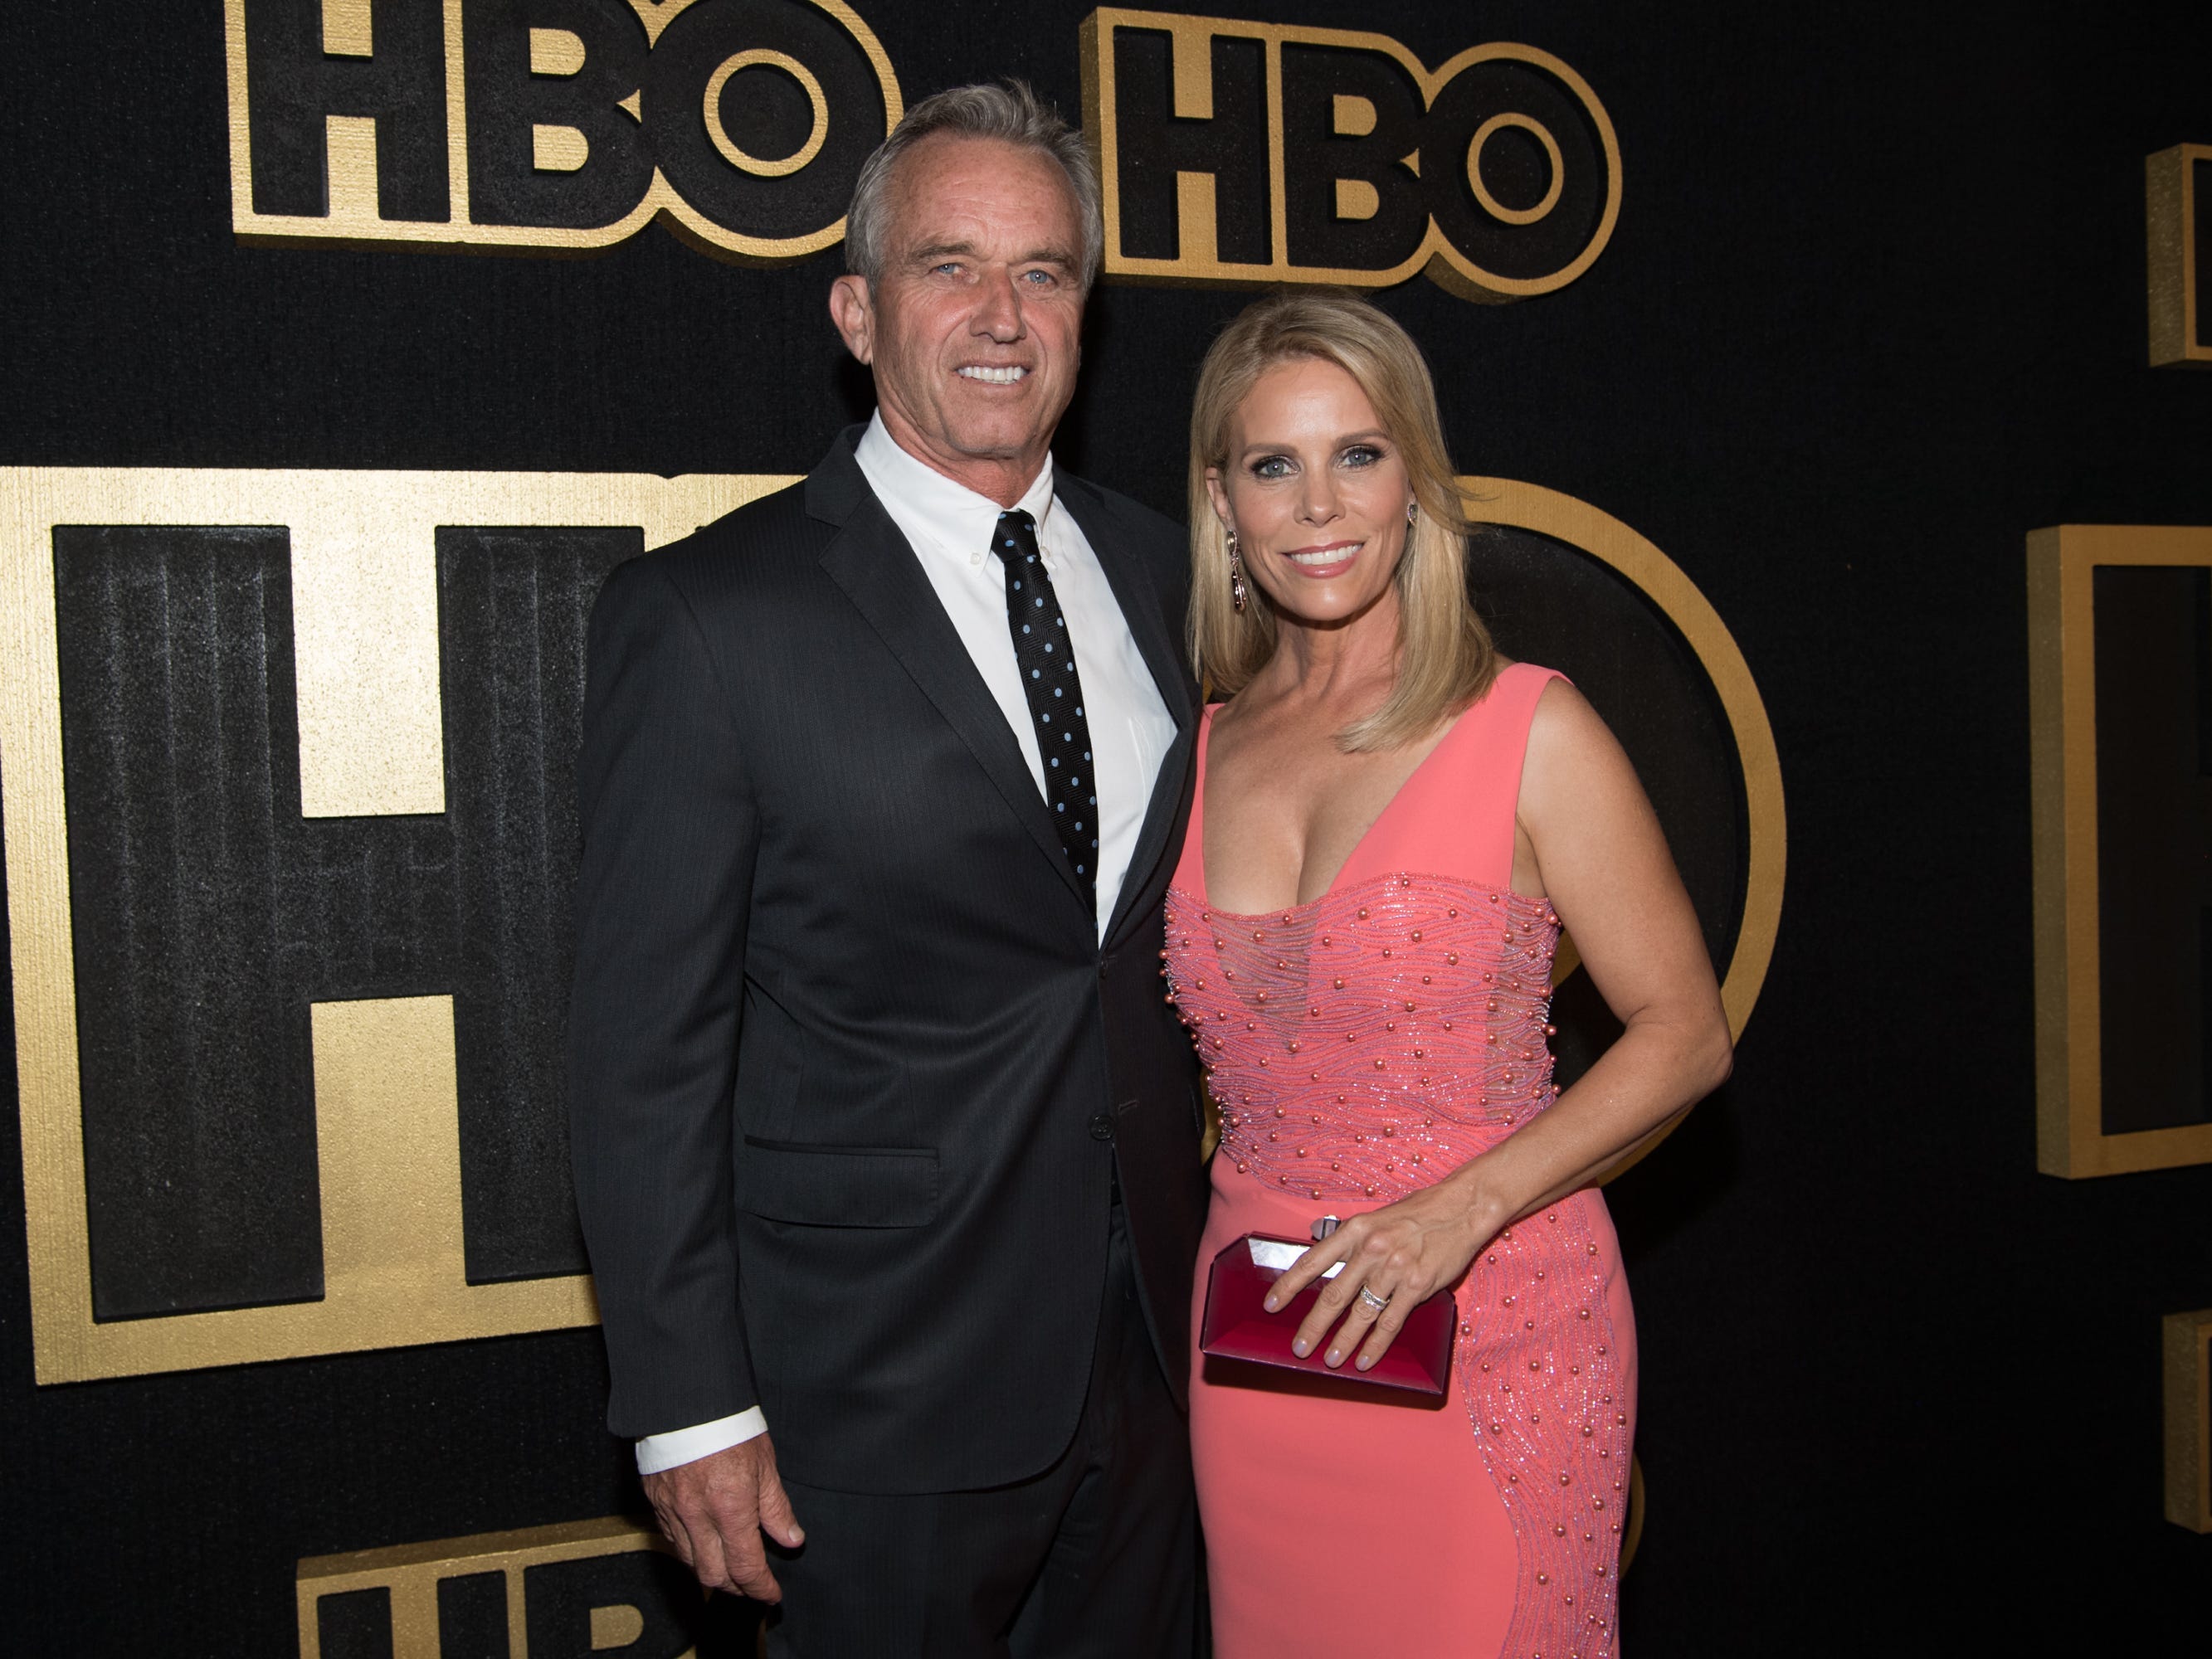 Robert Kennedy Jr. and his wife Cheryl Hines are worth an estimated 15